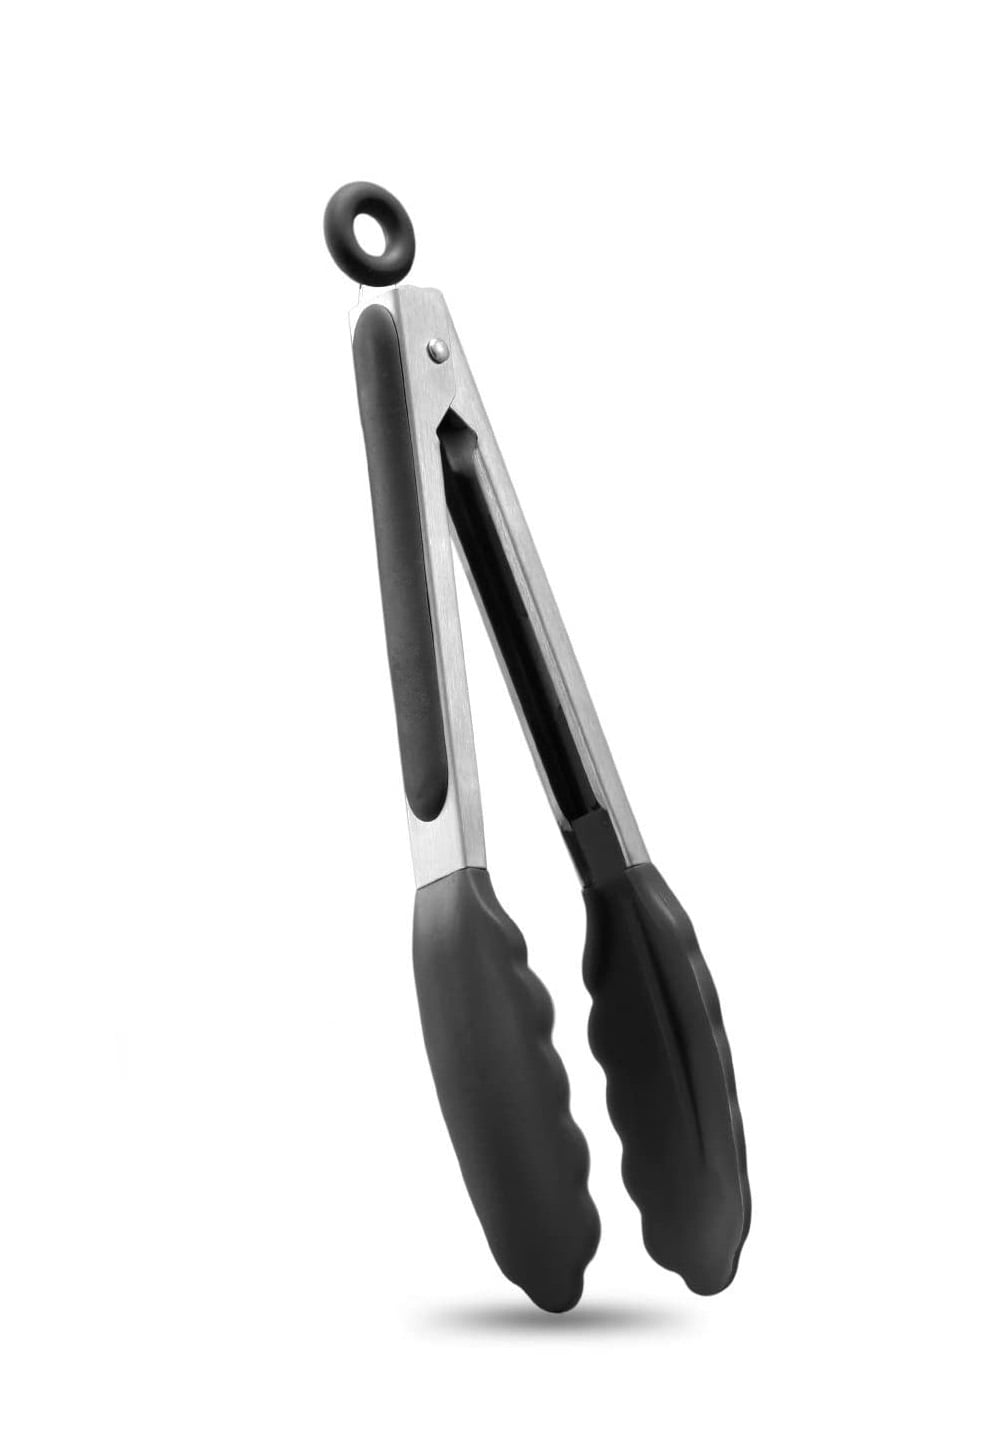 Madison Stainless Steel Silicone Kitchen Tongs For Cooking With Non Slip  Grip, Hanging Ring Easy To Store Kitchen Kit For Making Steaks, Sausages